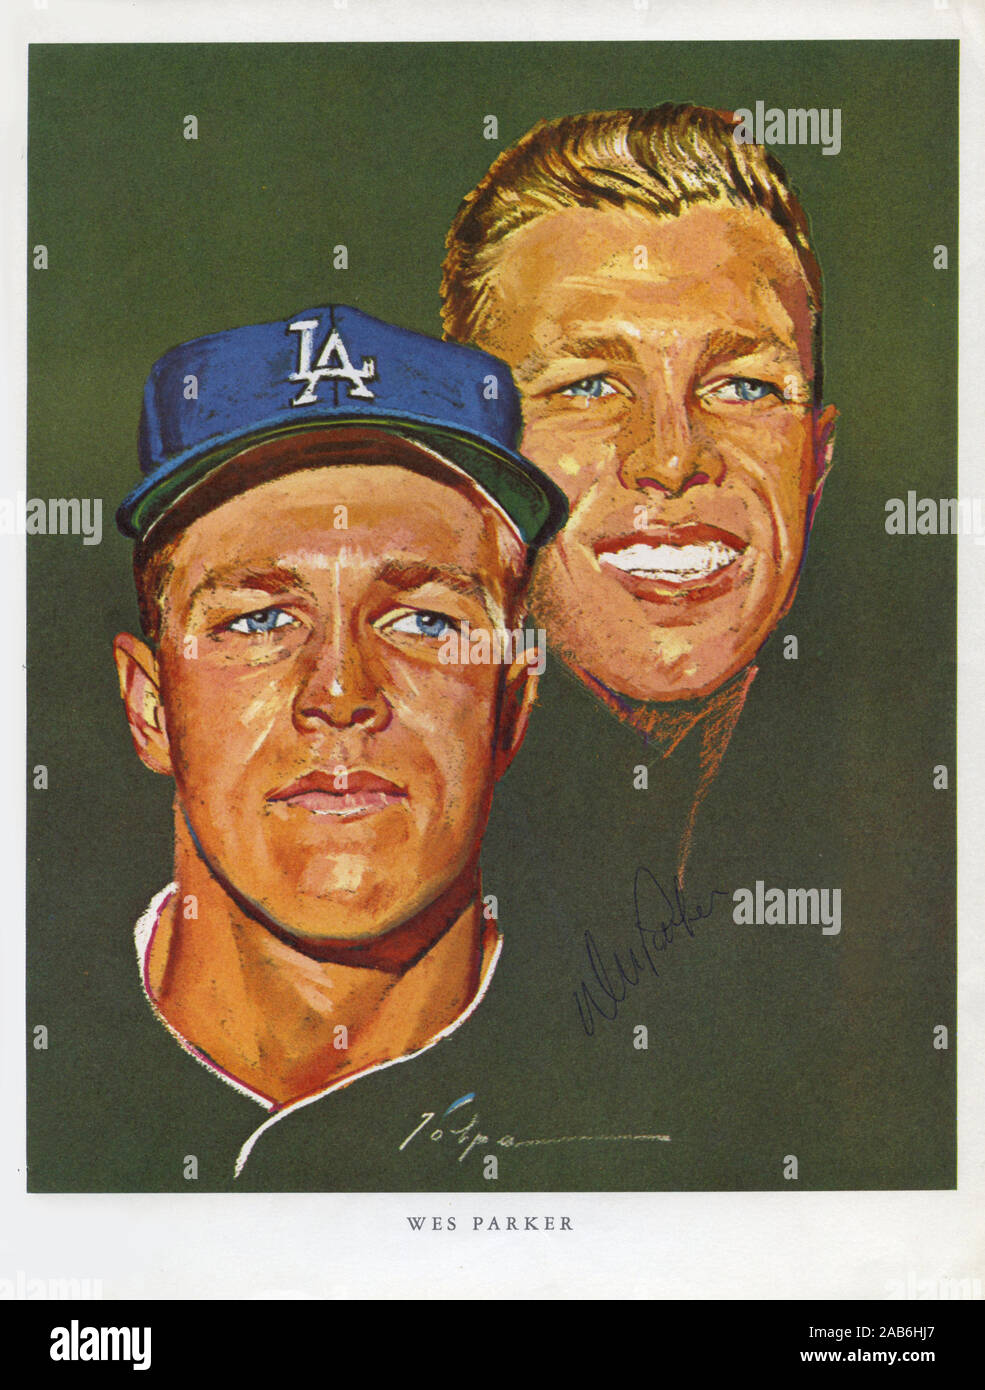 Souvenir portrait of Los Angeles Dodger player Wes Parker by artist Nicholas Volpe was given out to customers at 76 gas stations in Los Angeles in 1964 as a promotion. Stock Photo